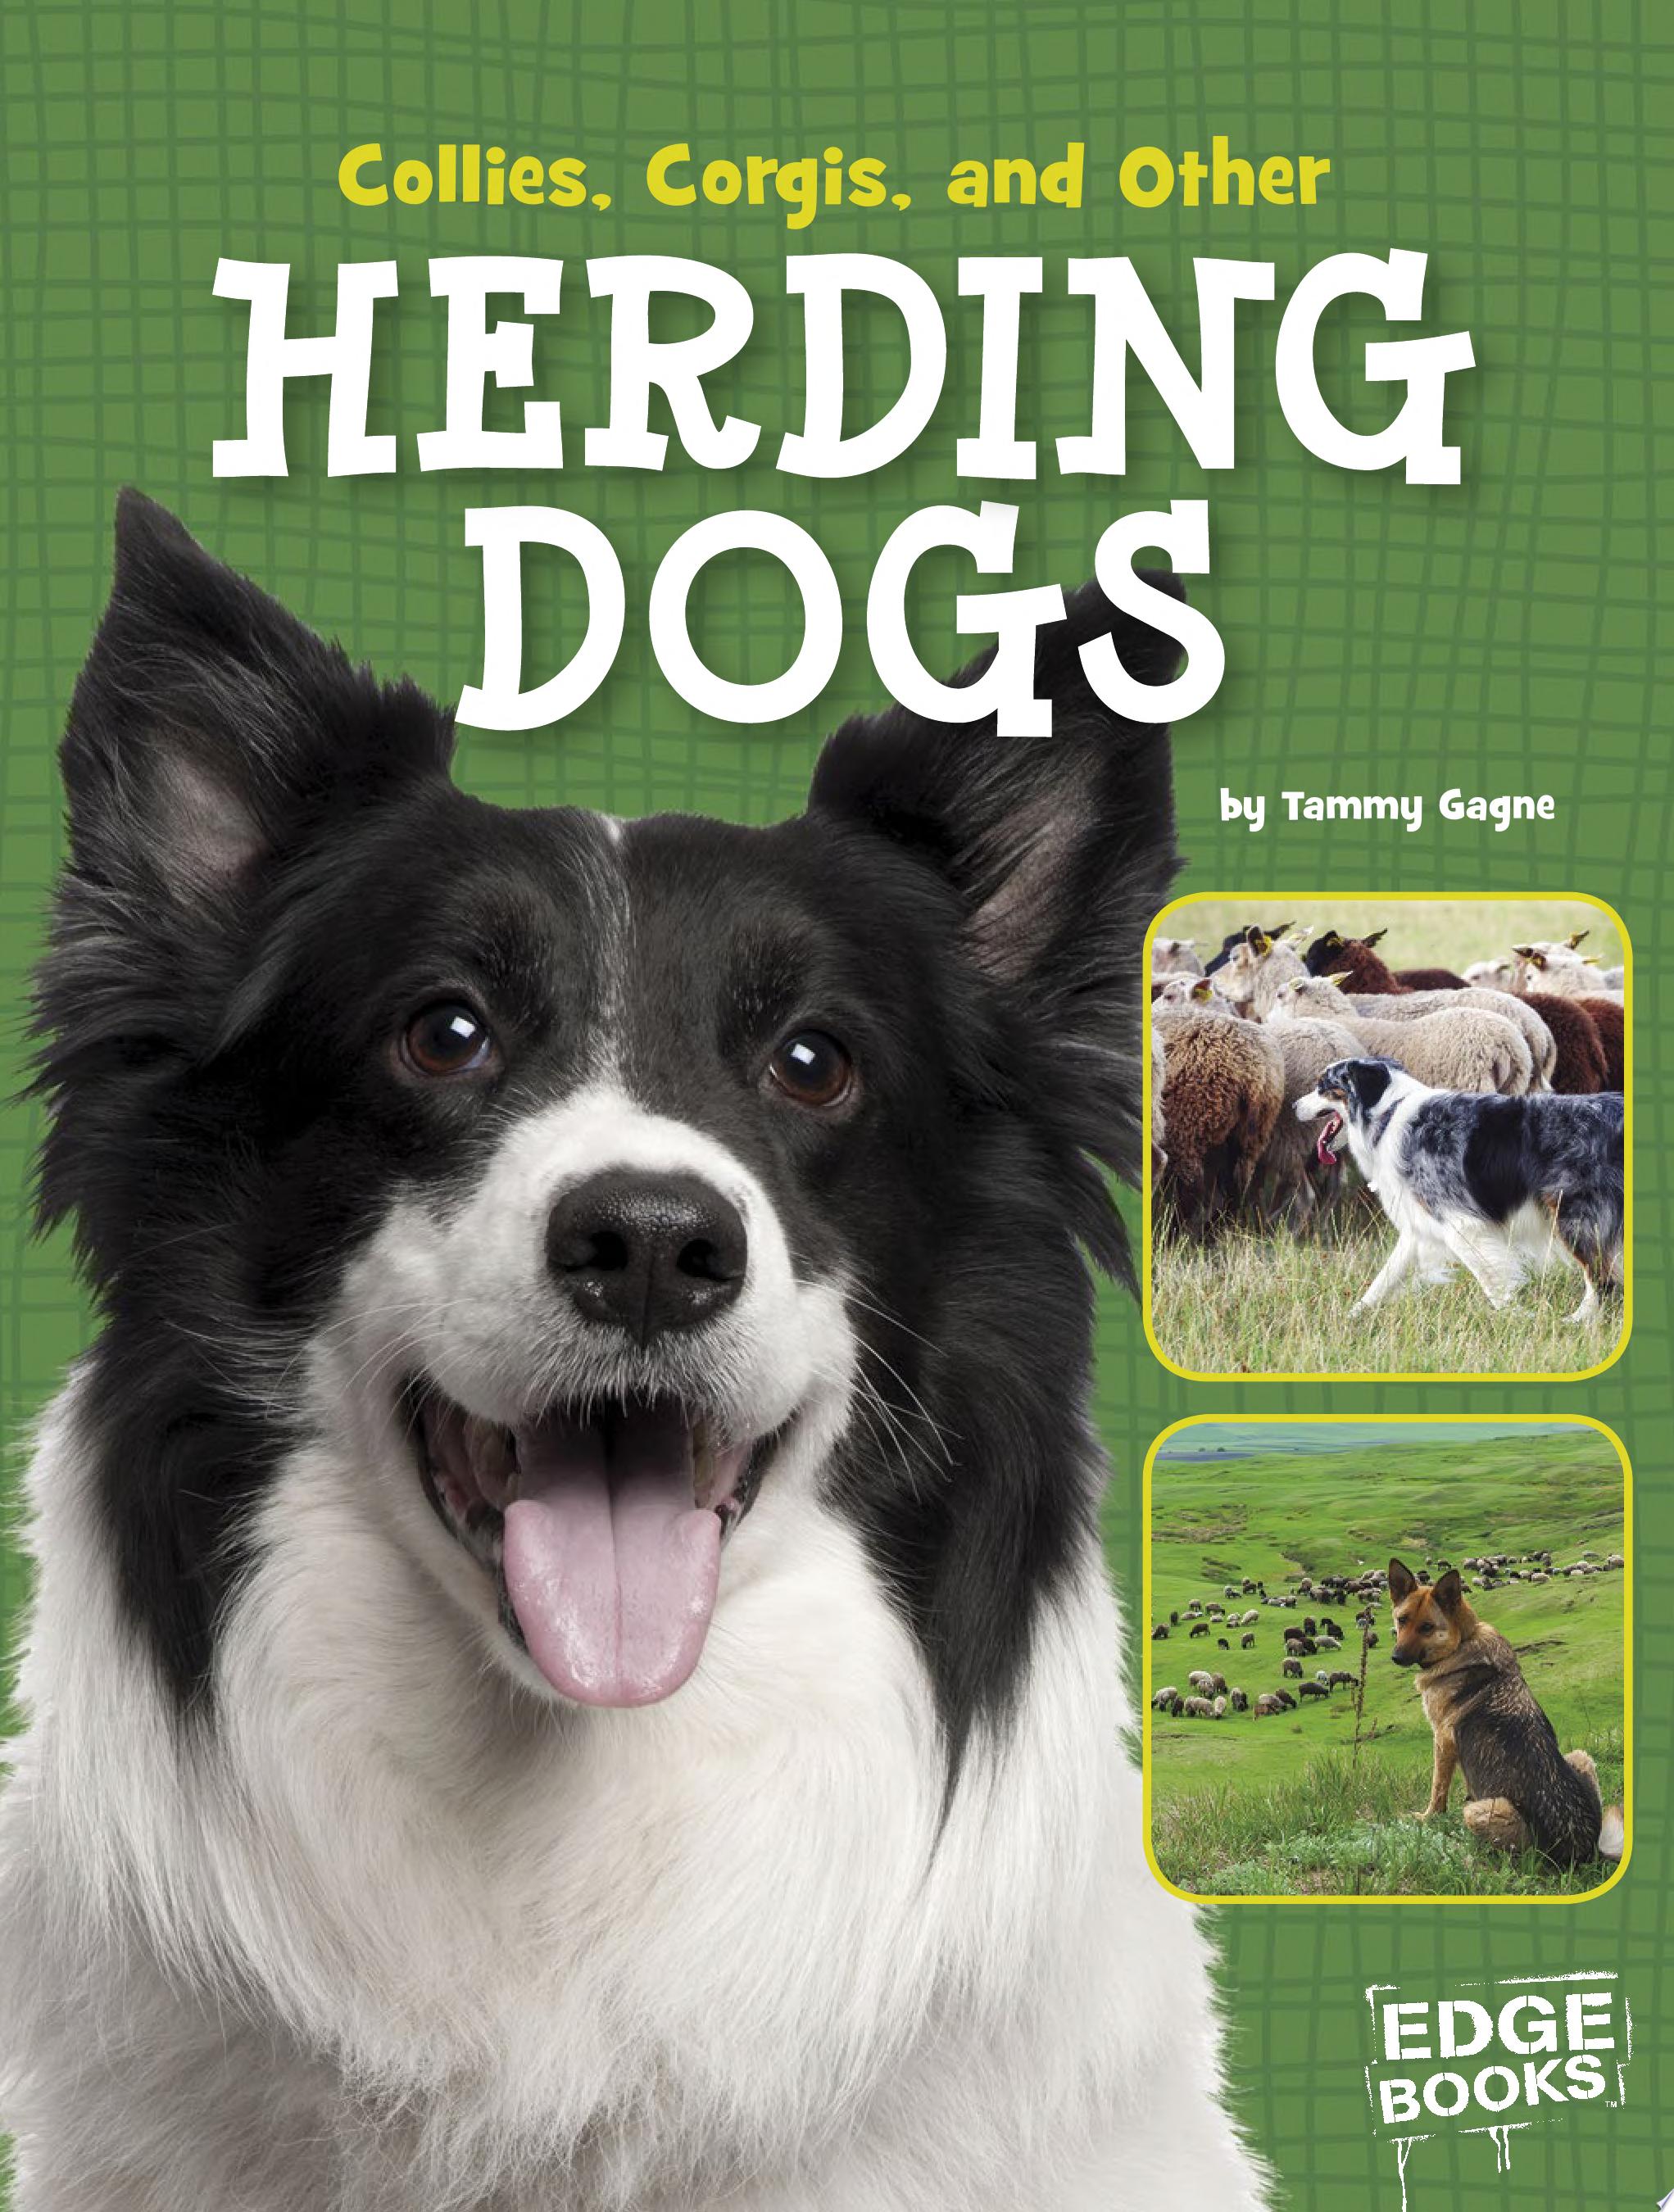 Image for "Collies, Corgis, and Other Herding Dogs"